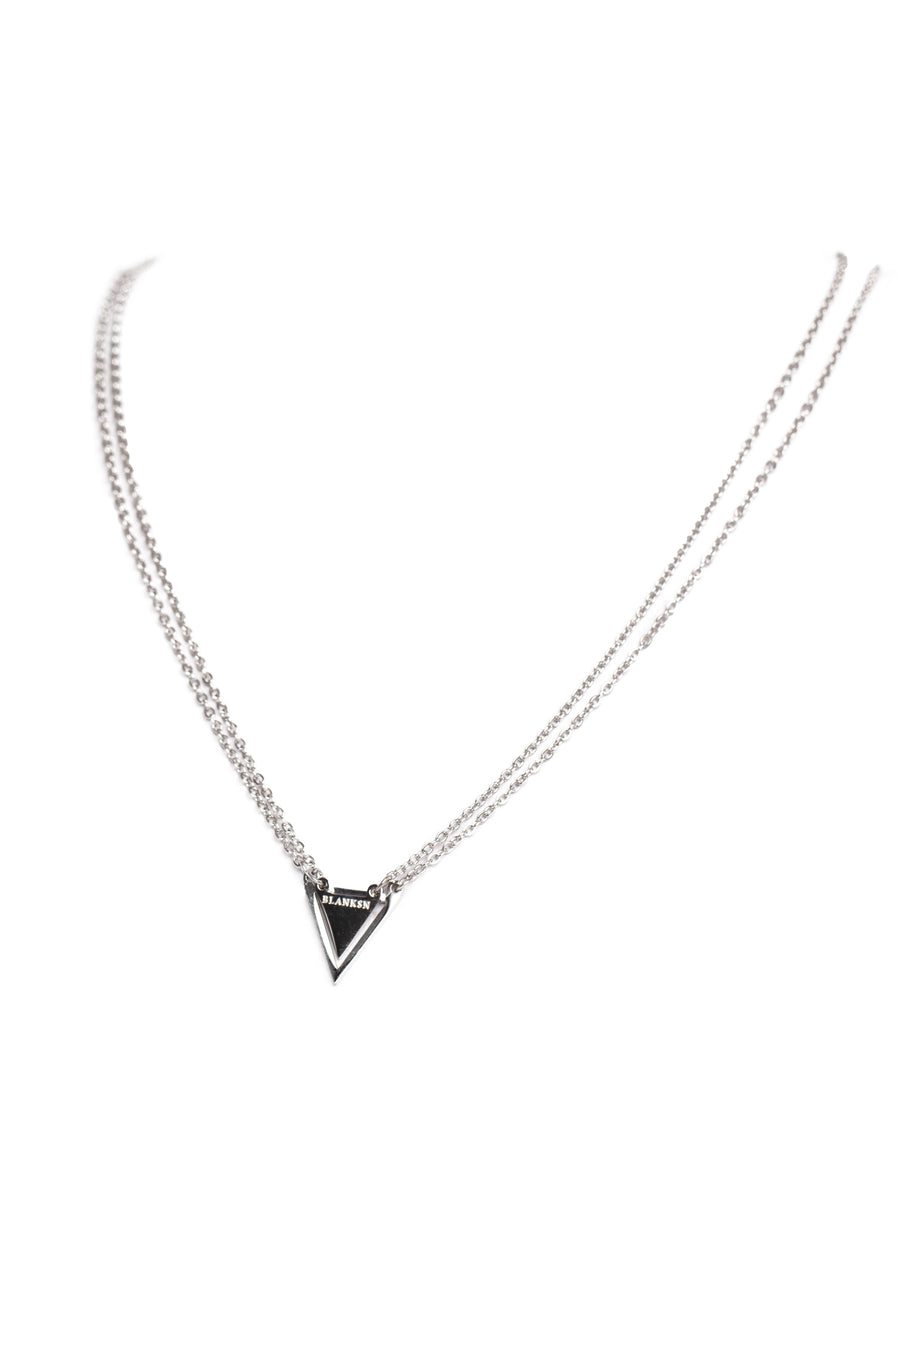 Strength Triangle Double Chain Necklace Silver | Inspirational Jewellery